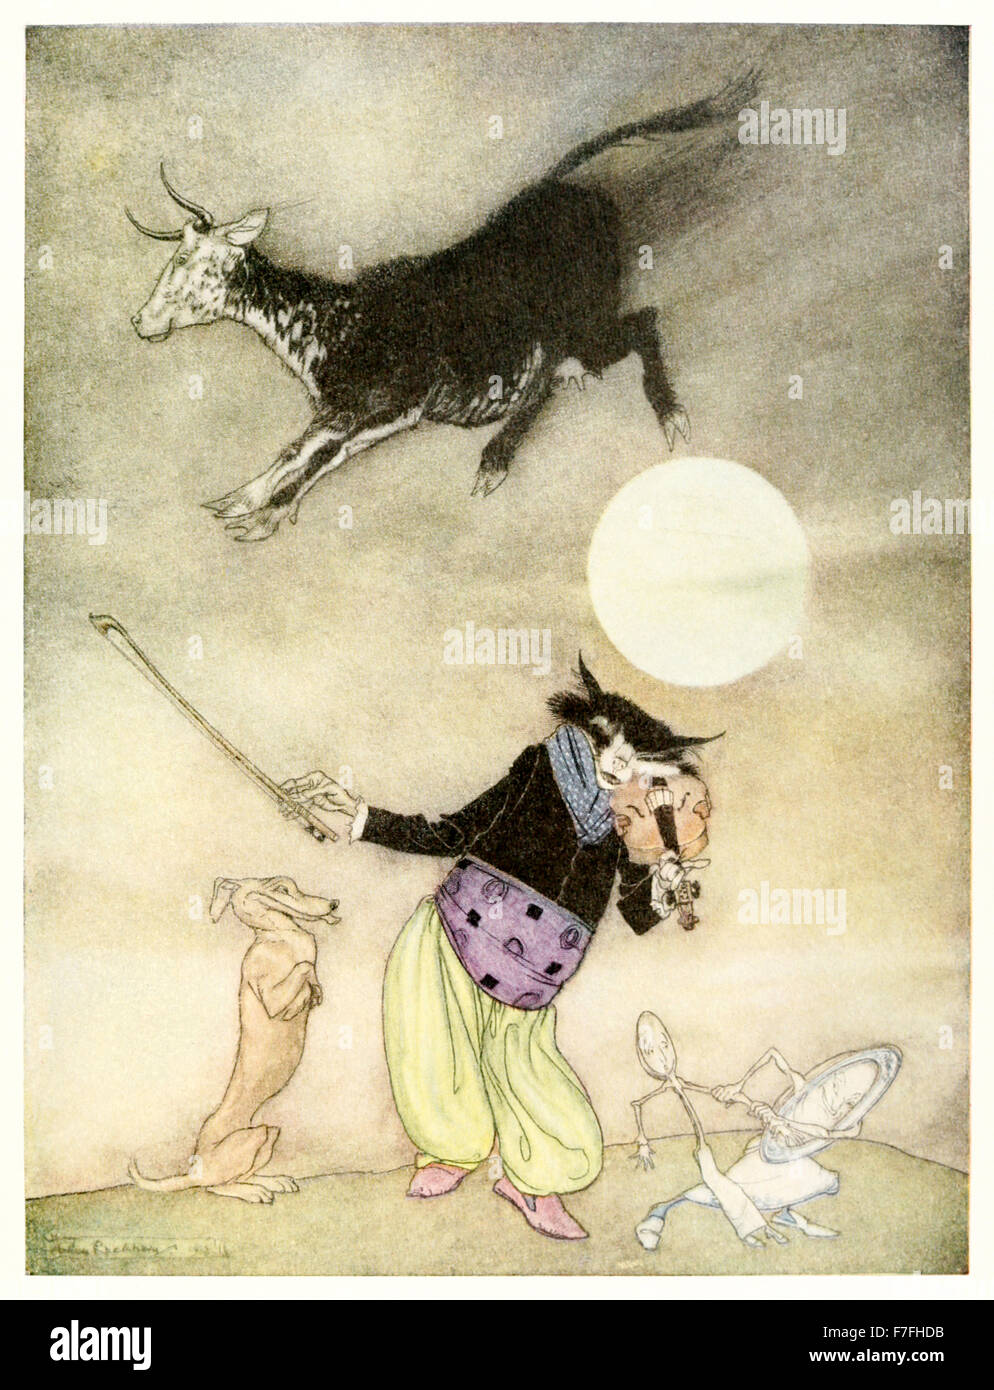 'Hey! Diddle, diddle, the cat and the fiddle!' from 'Mother Goose - The Old Nursery Rhymes' illustration by Arthur Rackham (1867-1939). See description for more information. Stock Photo